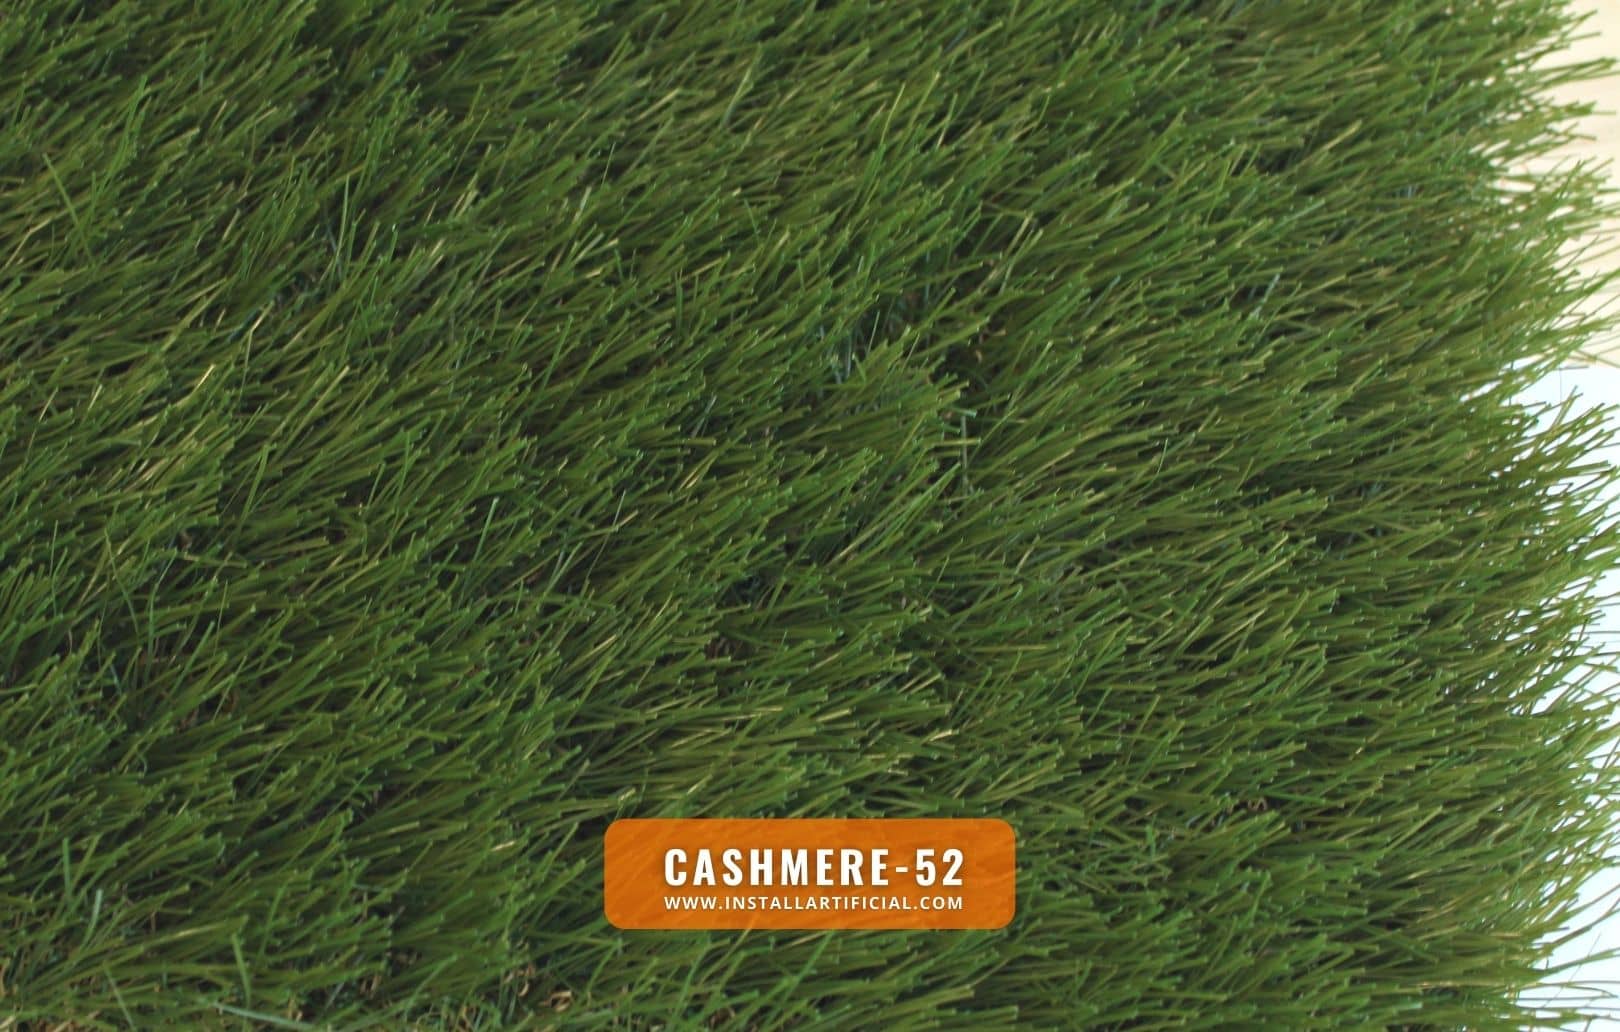 Cashmere-52, Global Syn Turf, top